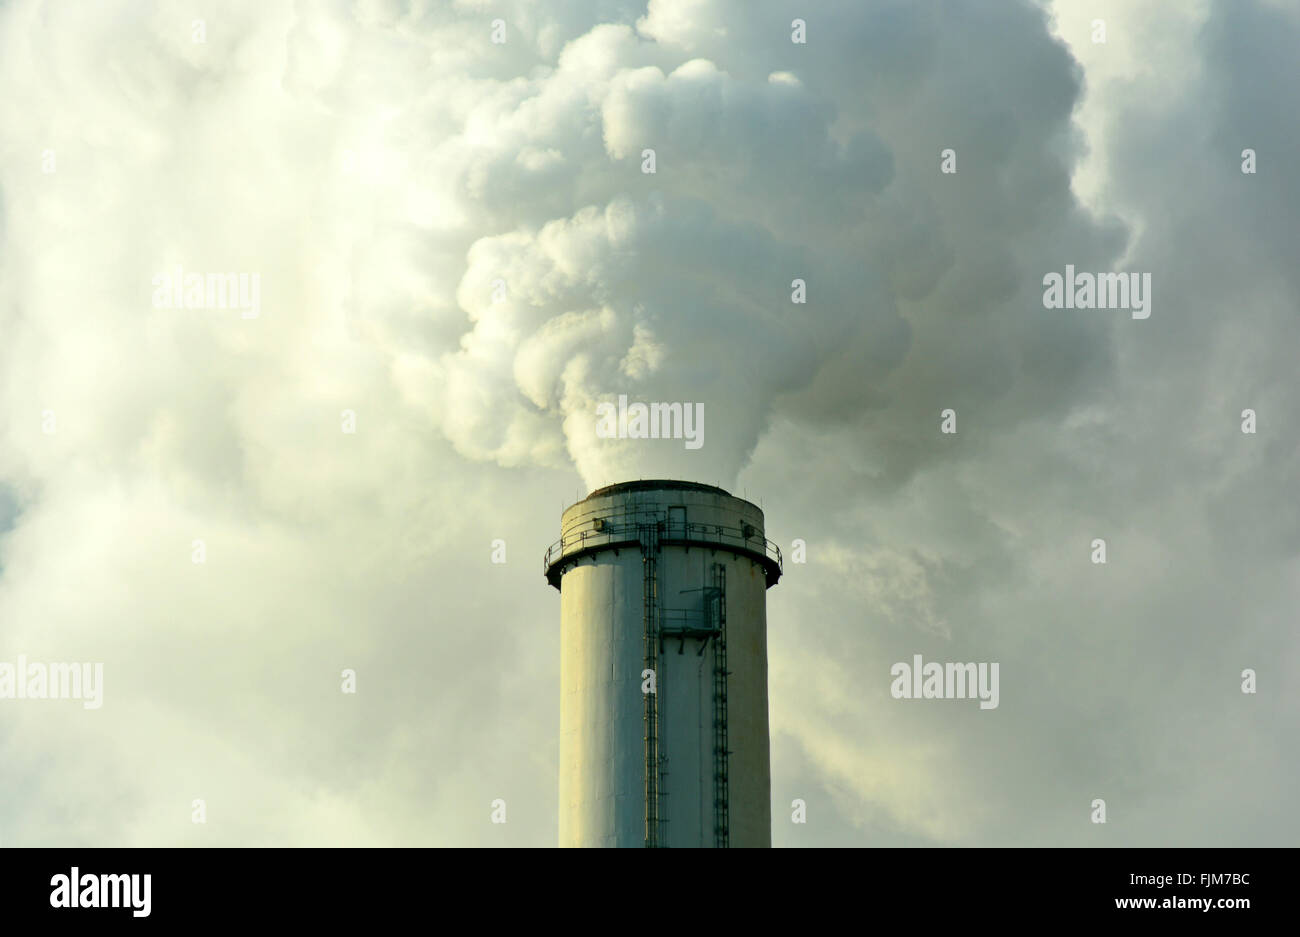 Coal Fossil Fuel Power Plant Smokestack Emits Carbon Dioxide Pollution Stock Photo